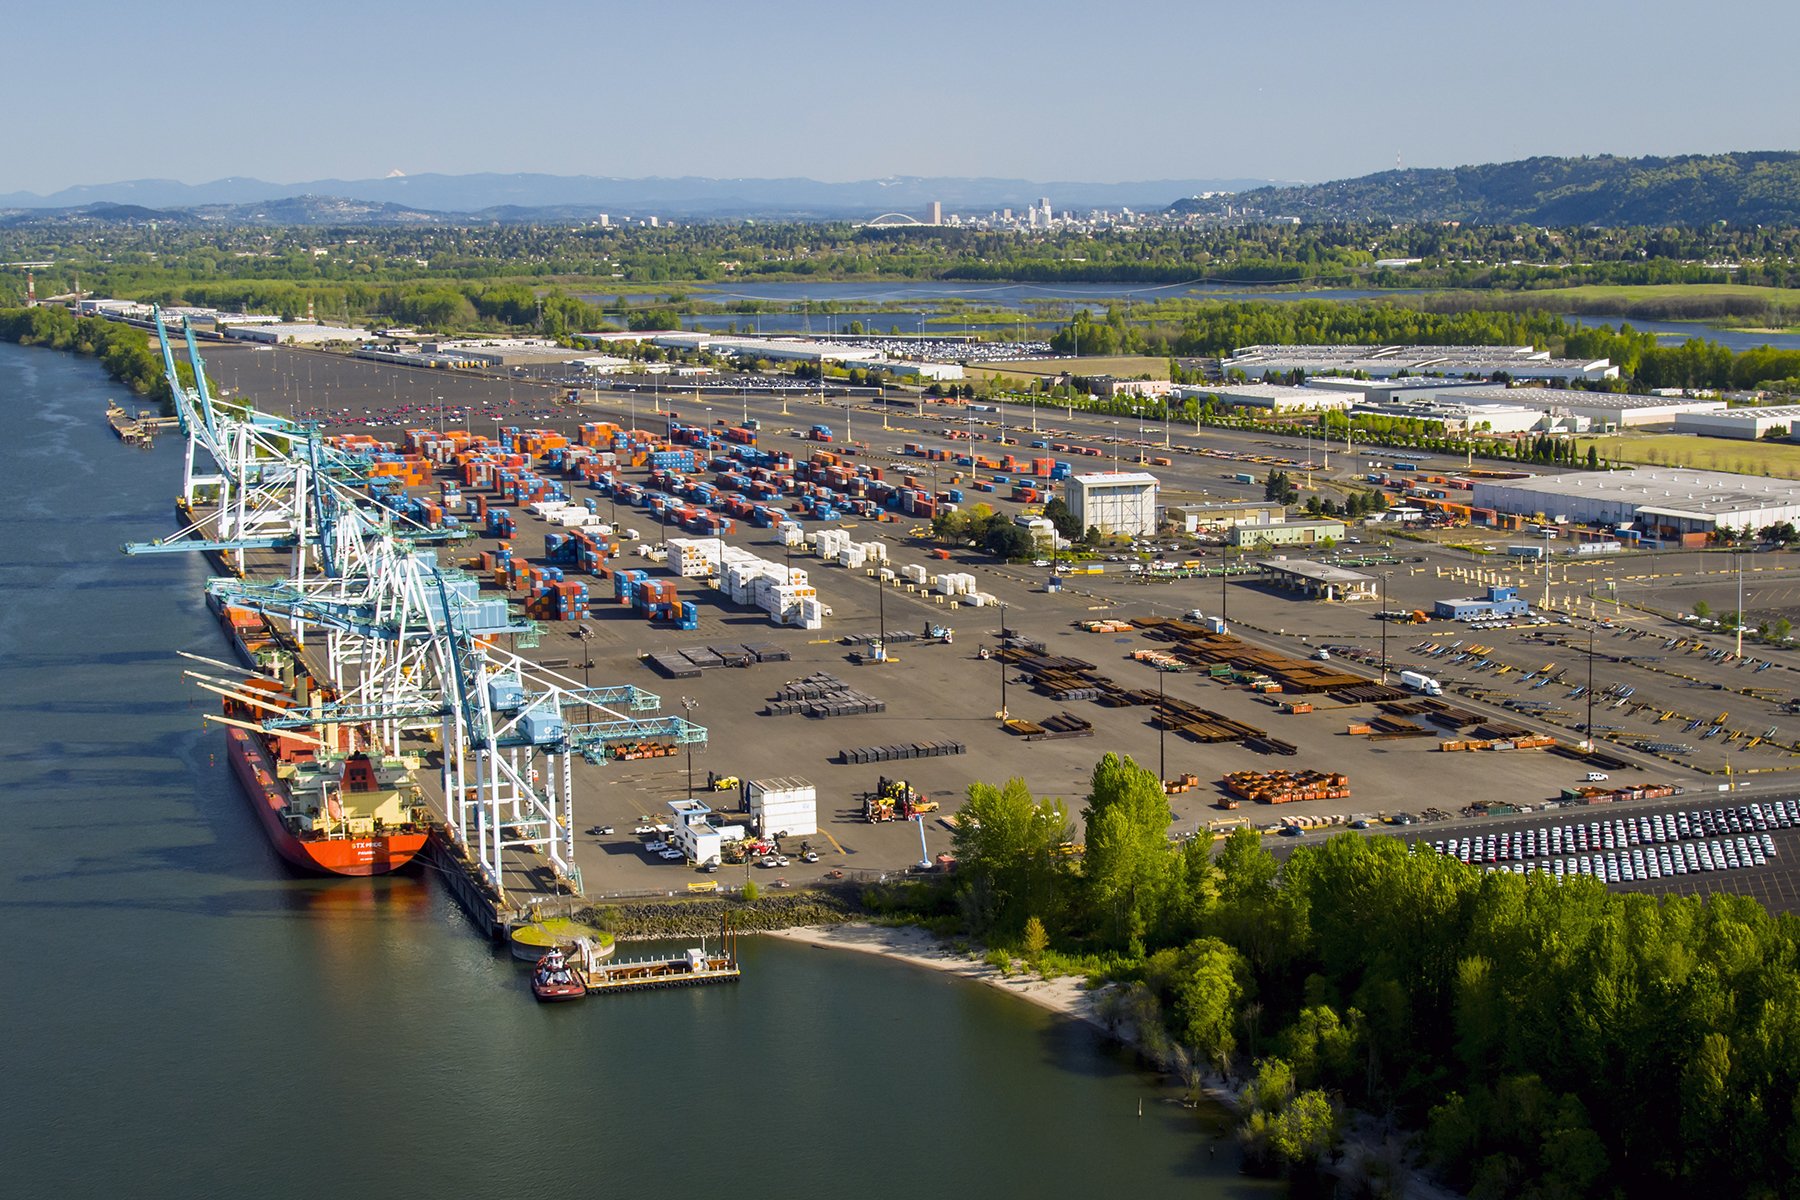 Port of Portland on Twitter: "Port of Portland, ICTSI agree to lease termination at Terminal 6 allowing for fresh start: https://t.co/fl1ctNOaLl https://t.co/3TrWECJegN" / Twitter